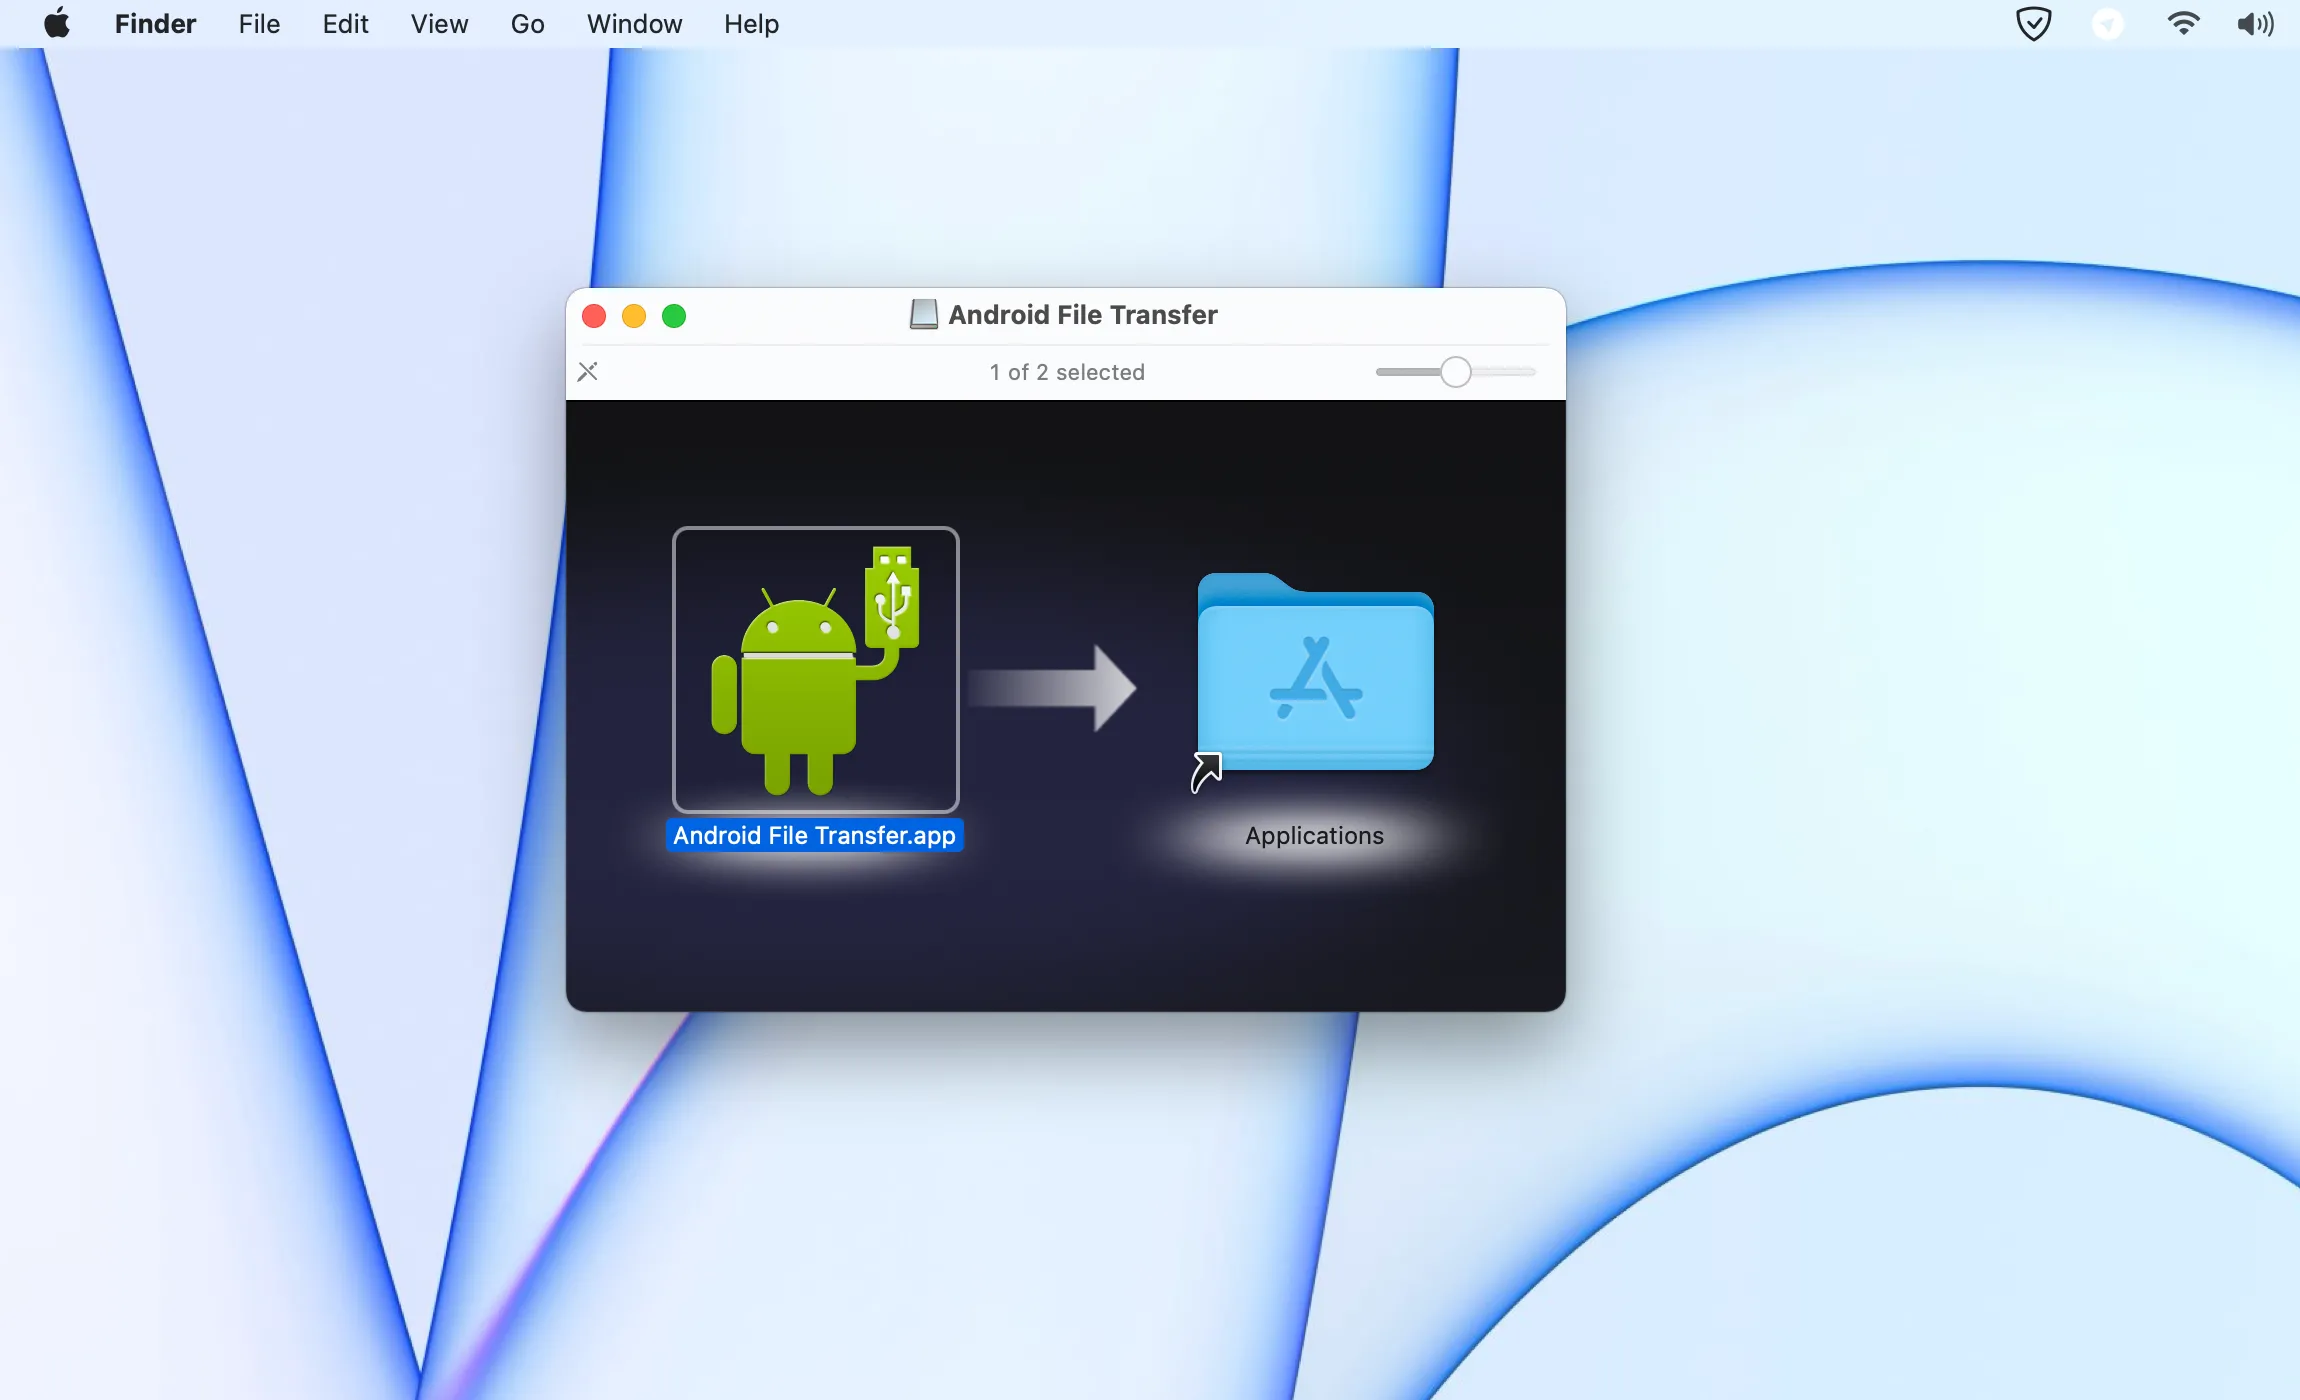 Android to Mac File Transfer: Drag and drop Android File Transfer app to Applications folder